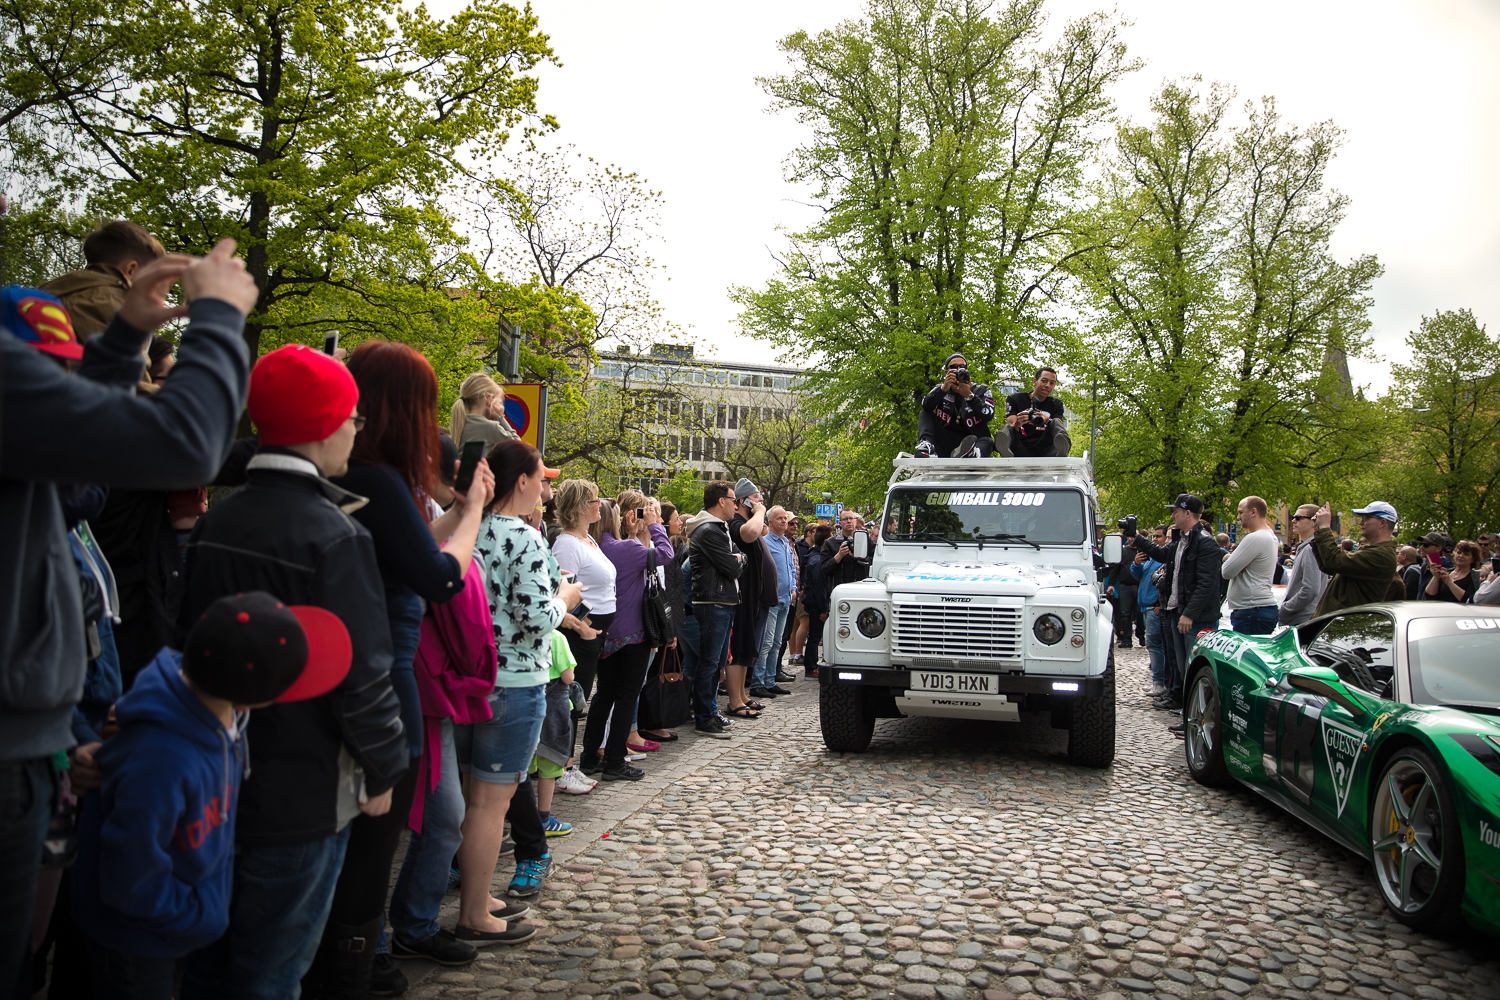 SMoores_15-05-24_Gumball 3000 Day 1_0923-Edit.jpg